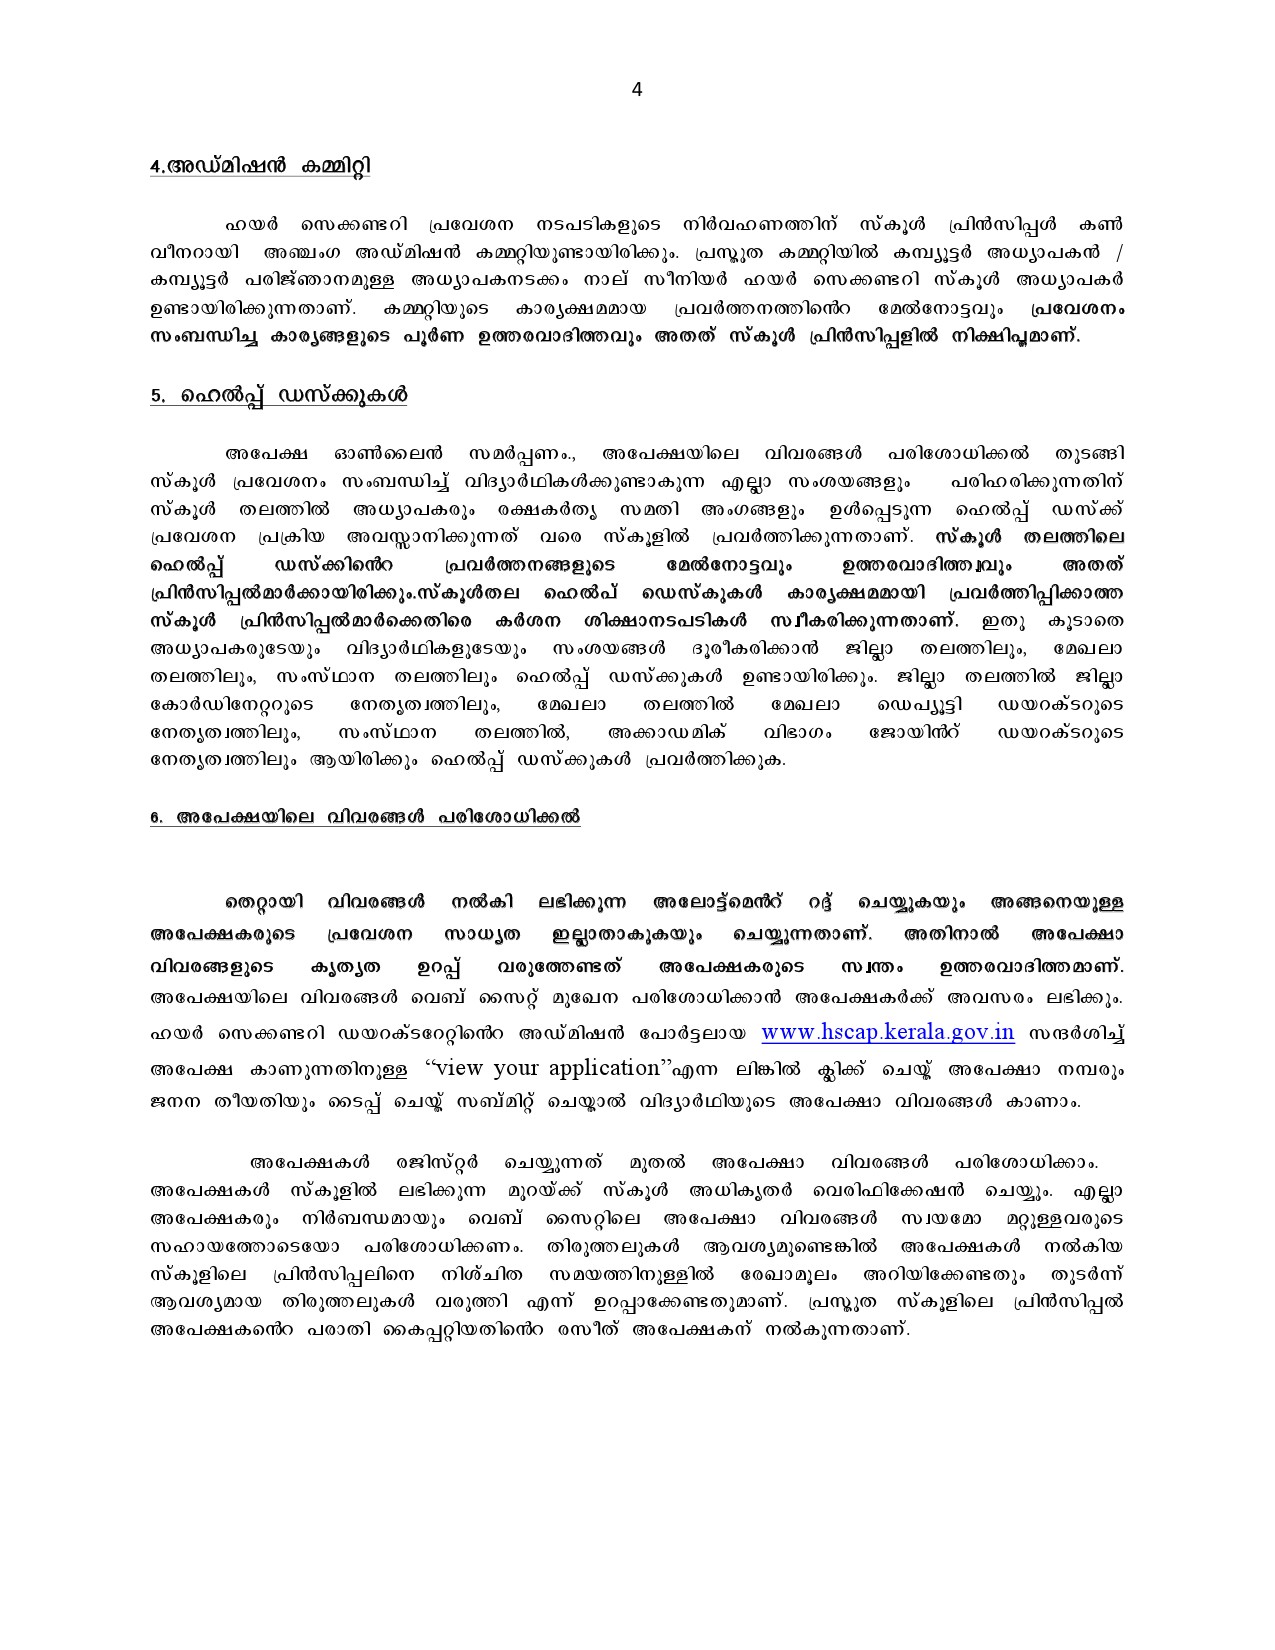 How To Apply For Kerala Higher Secondary Admission 2019 - Notification Image 4